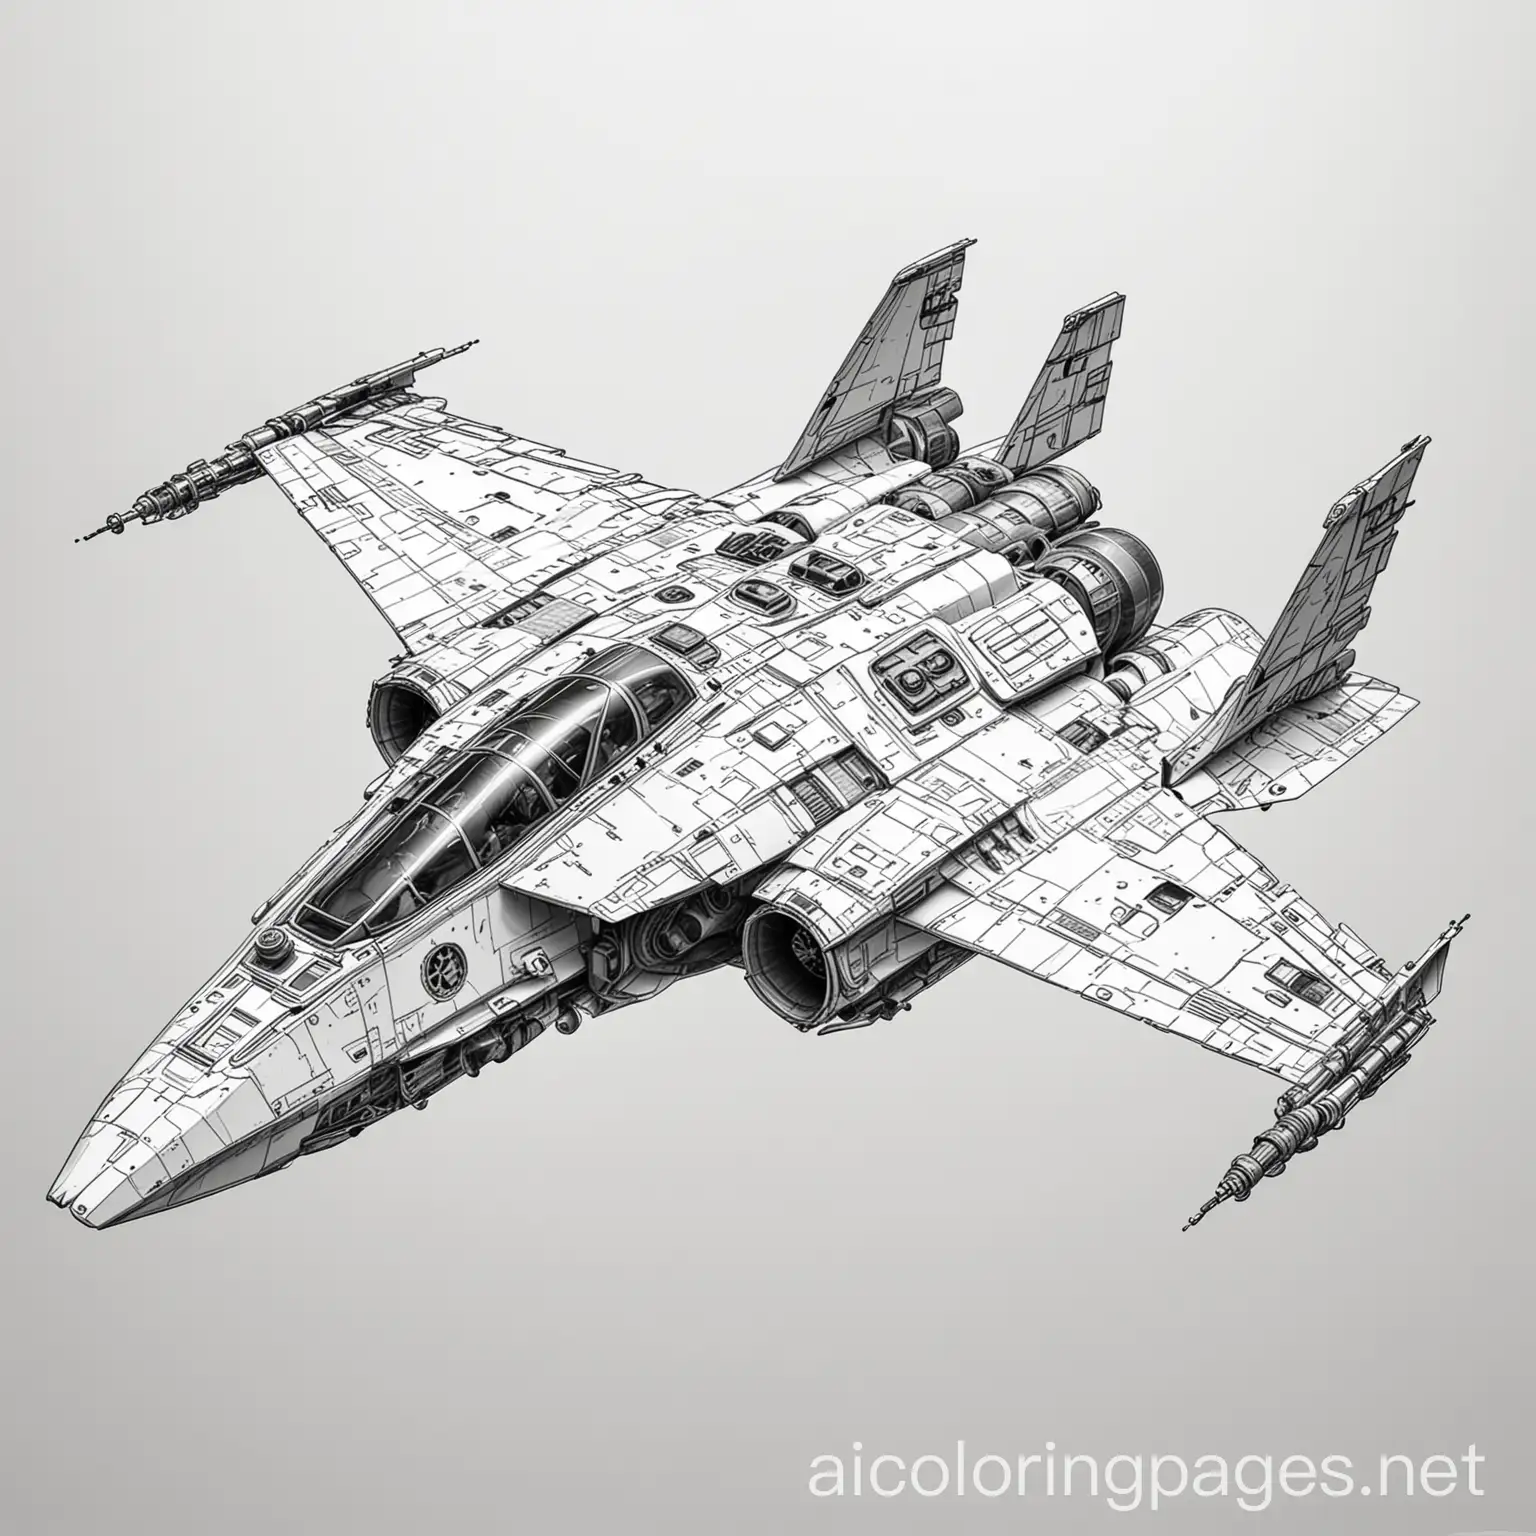 Star Wars fighter plane, Coloring Page, black and white, line art, white background, Simplicity, Ample White Space.